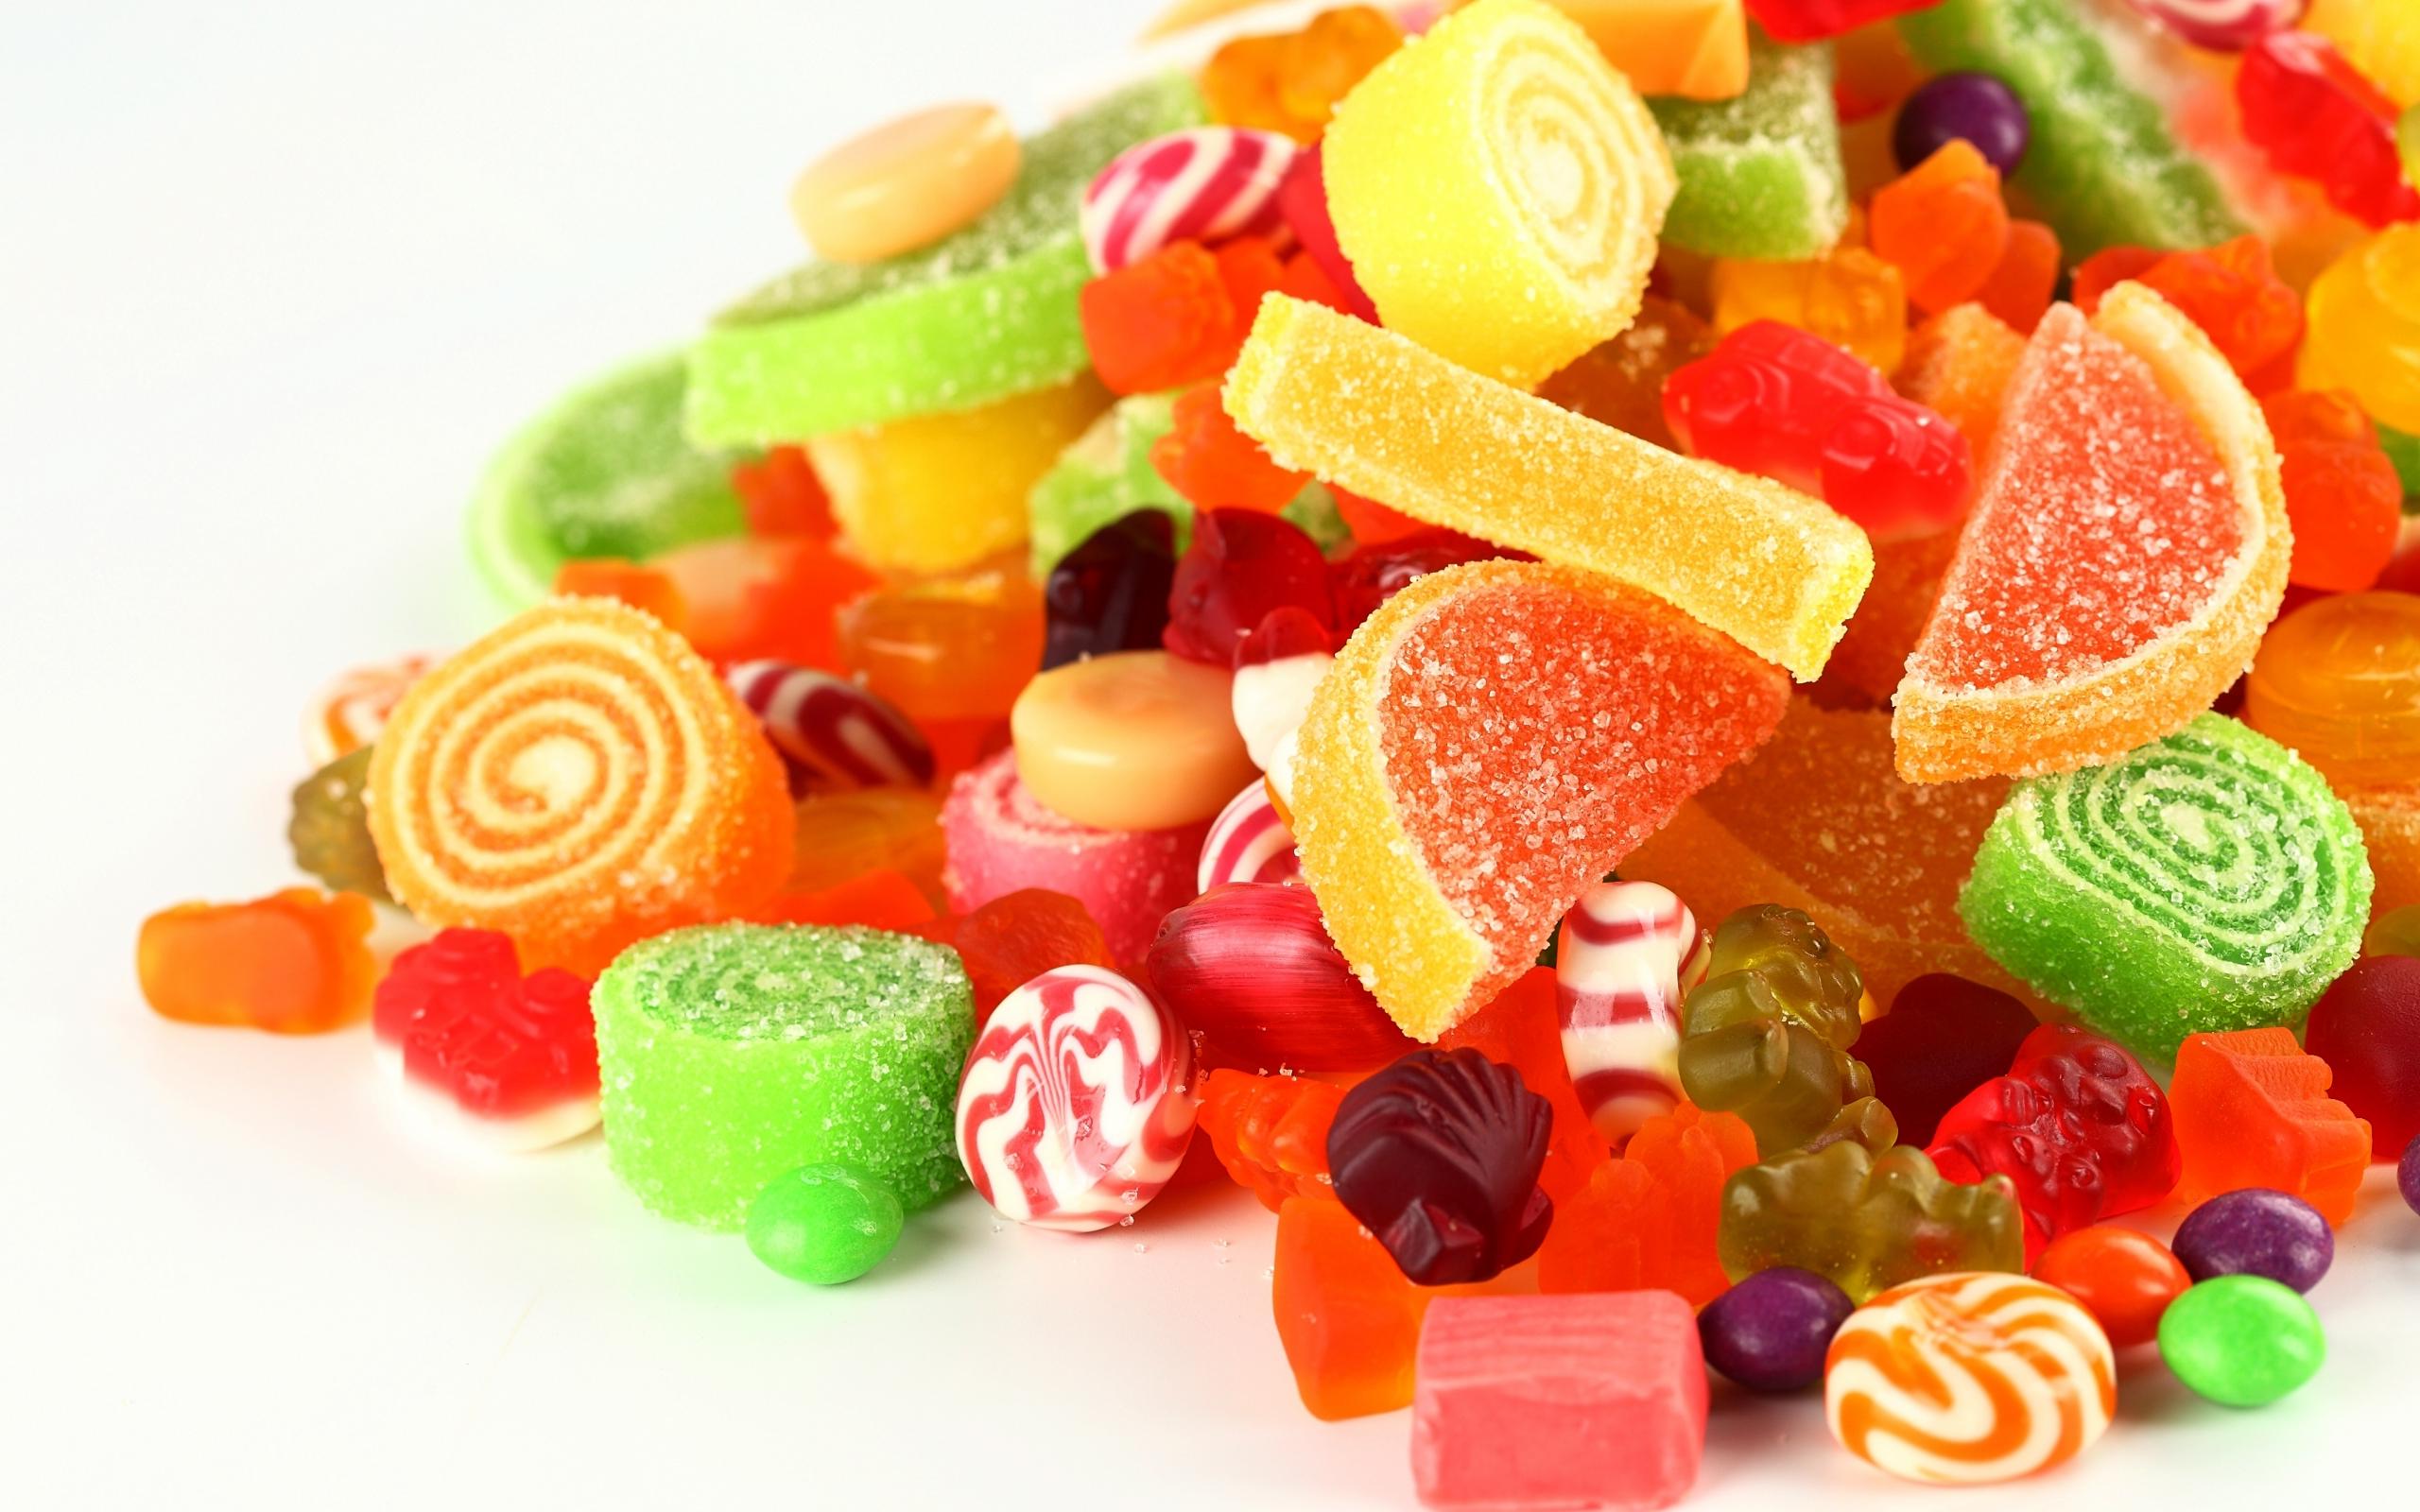 Colorful Candy Wallpaper 2560x1600 ID40358